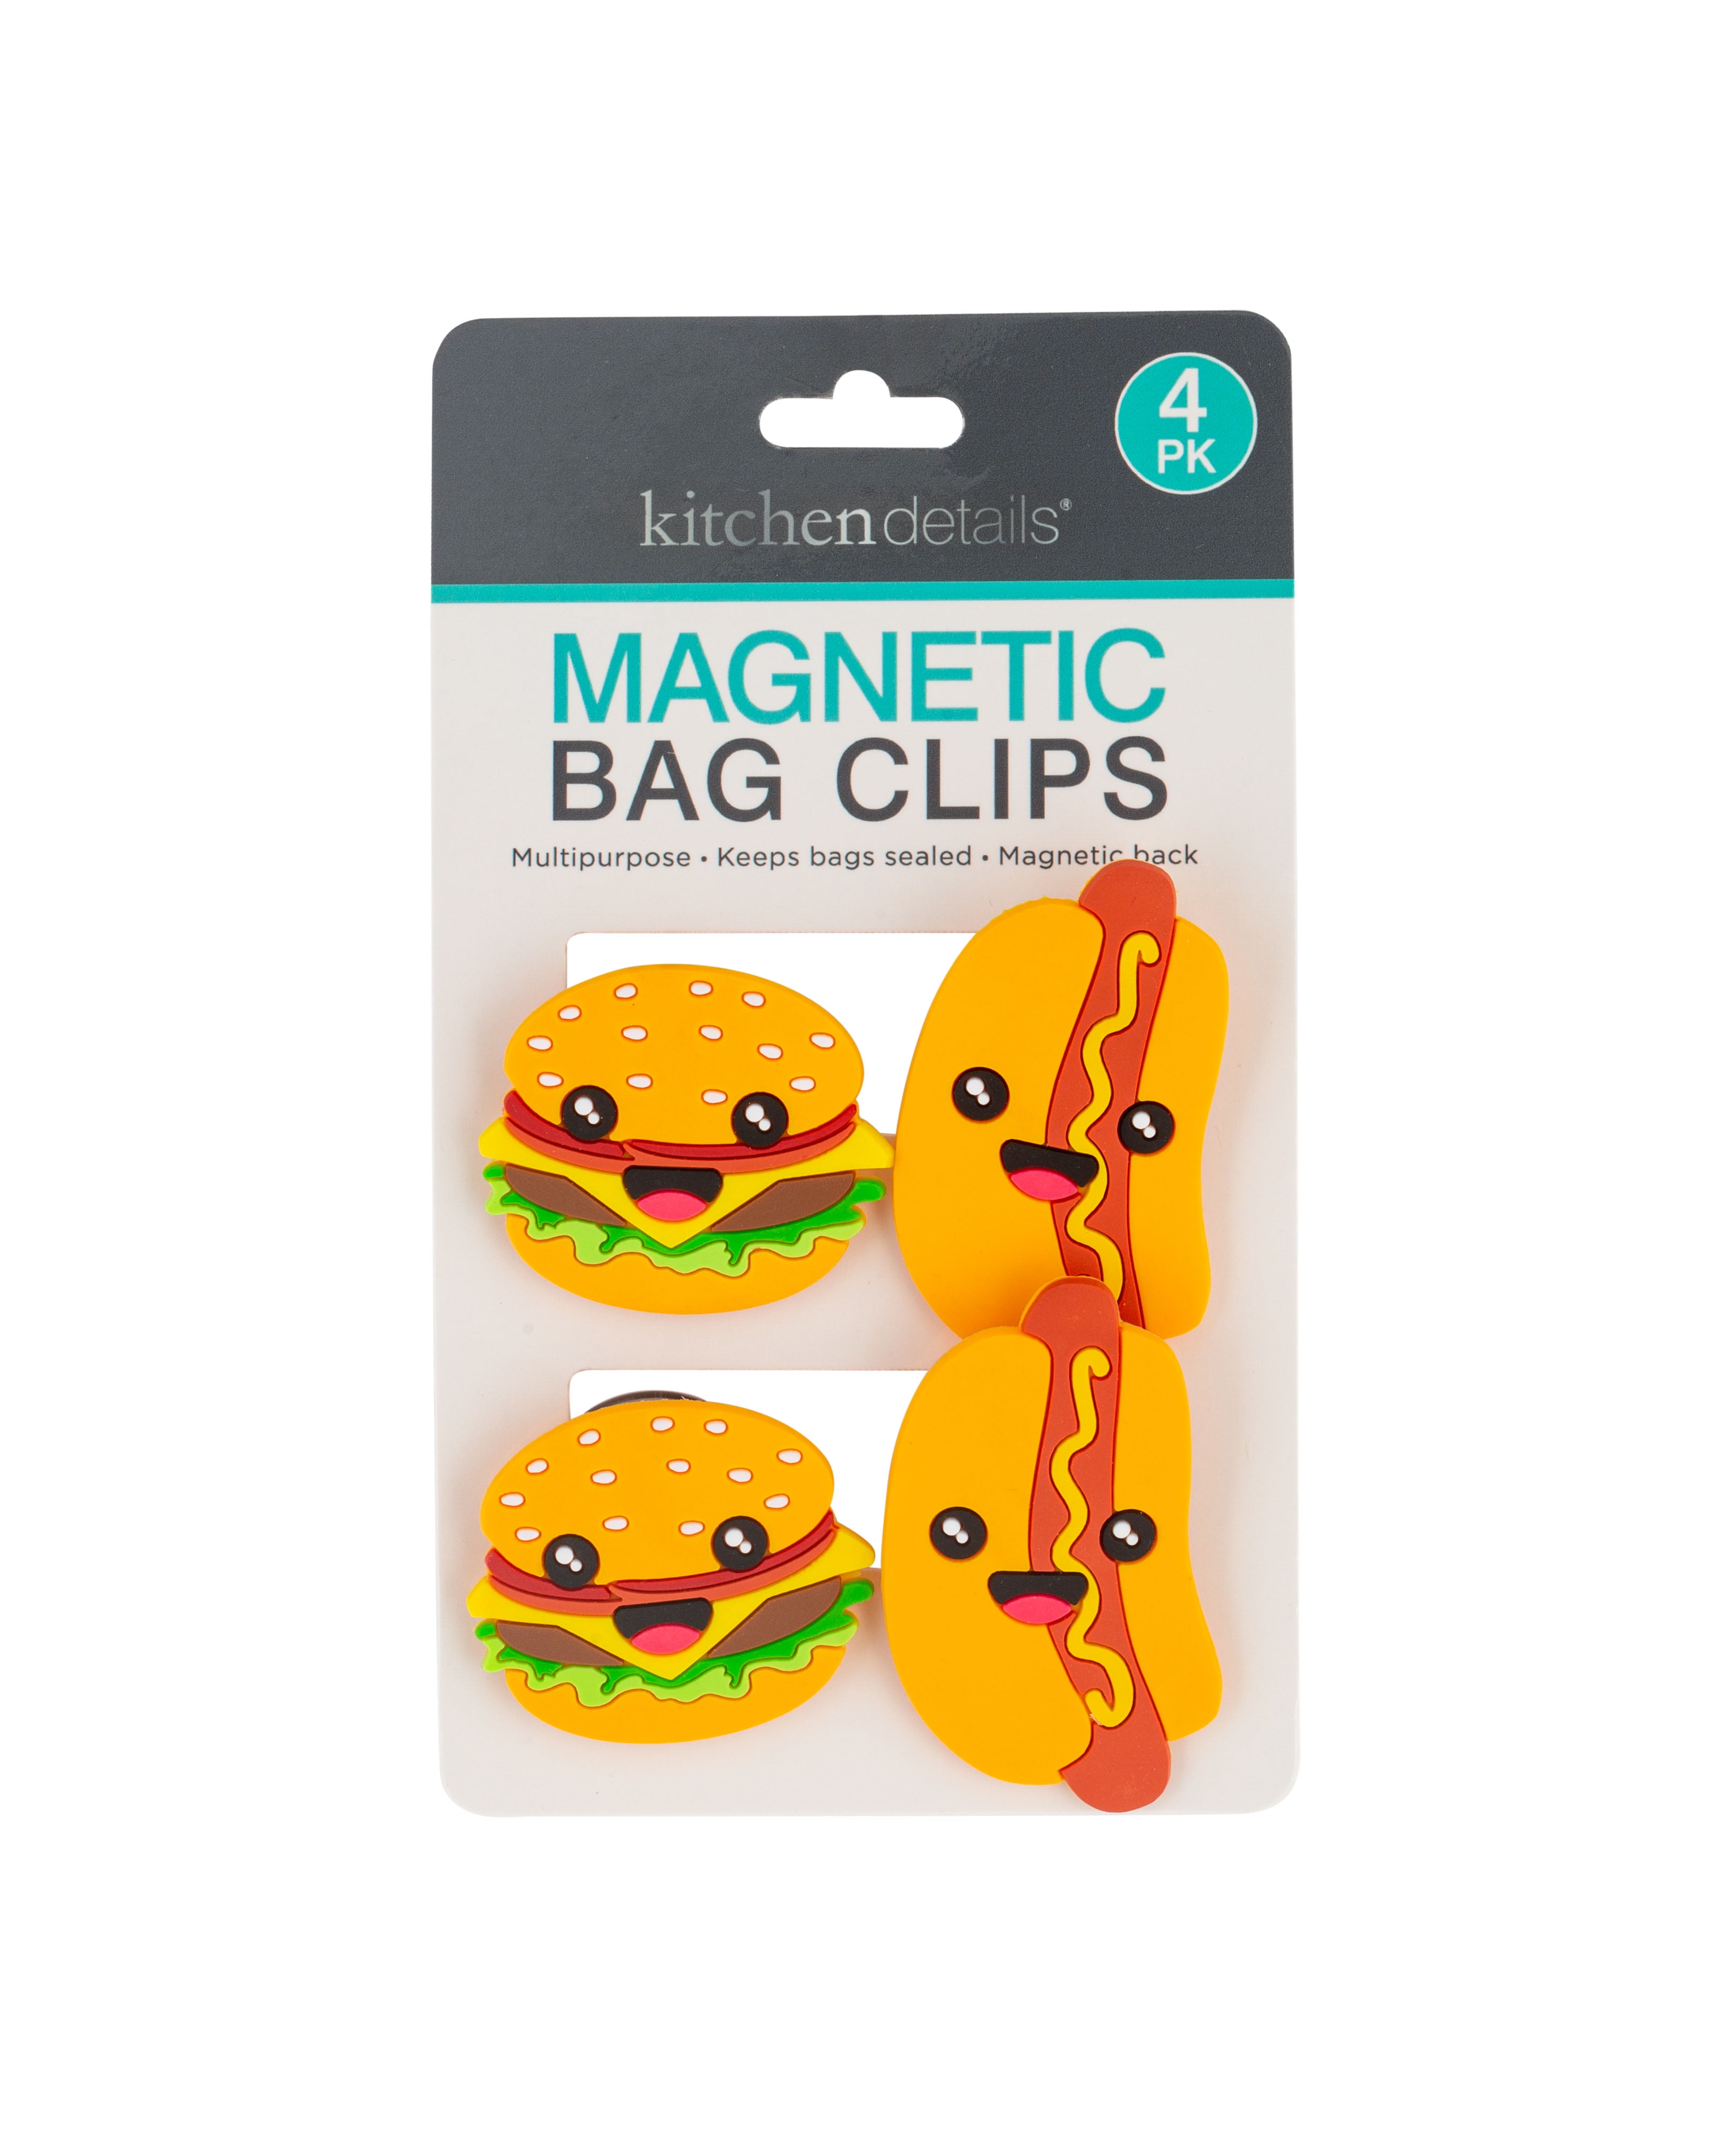 Magnetic Bag Clips 15 Piece Set, Food Snacks Paper pinch type back